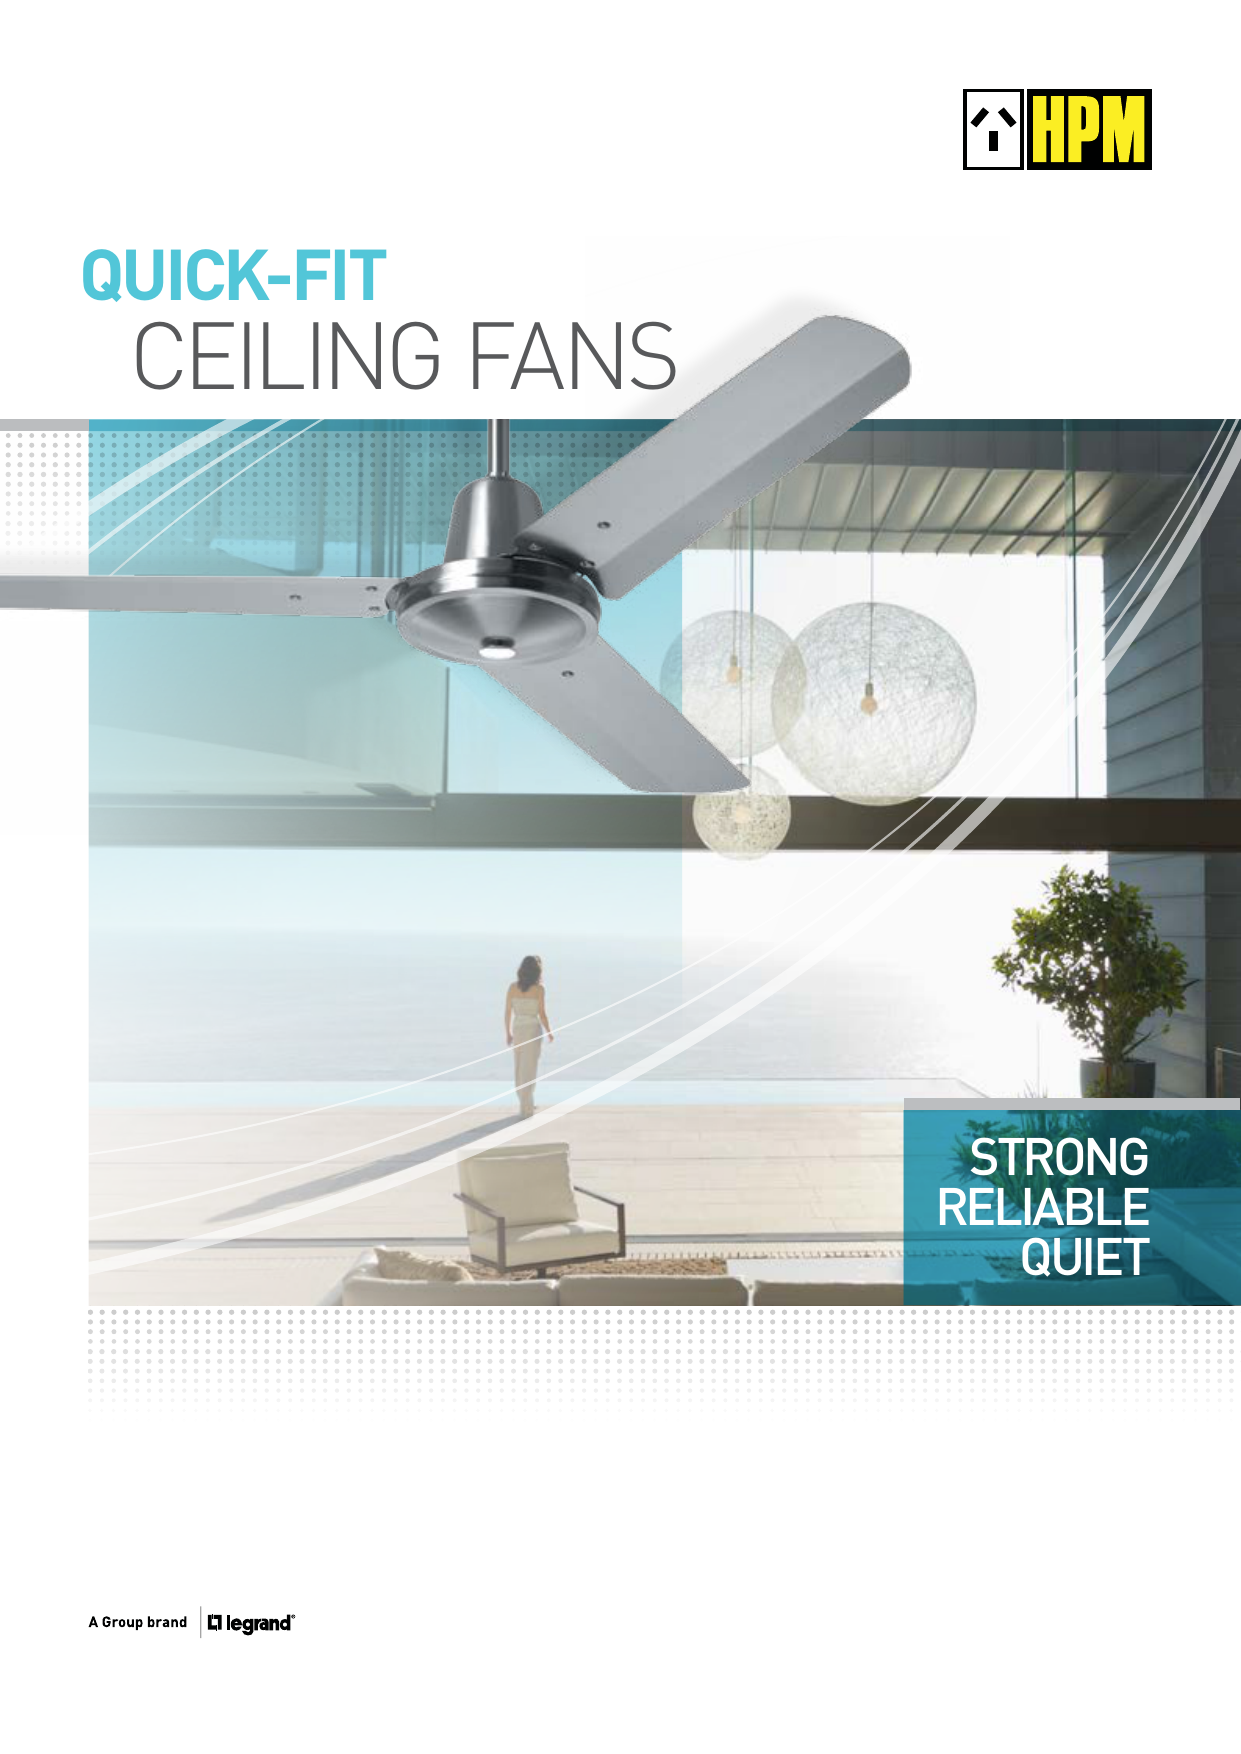 HPM REMOTE CONTROL KIT Hang Sure Ceiling Fan Dimmable 3-Speed with Timer 